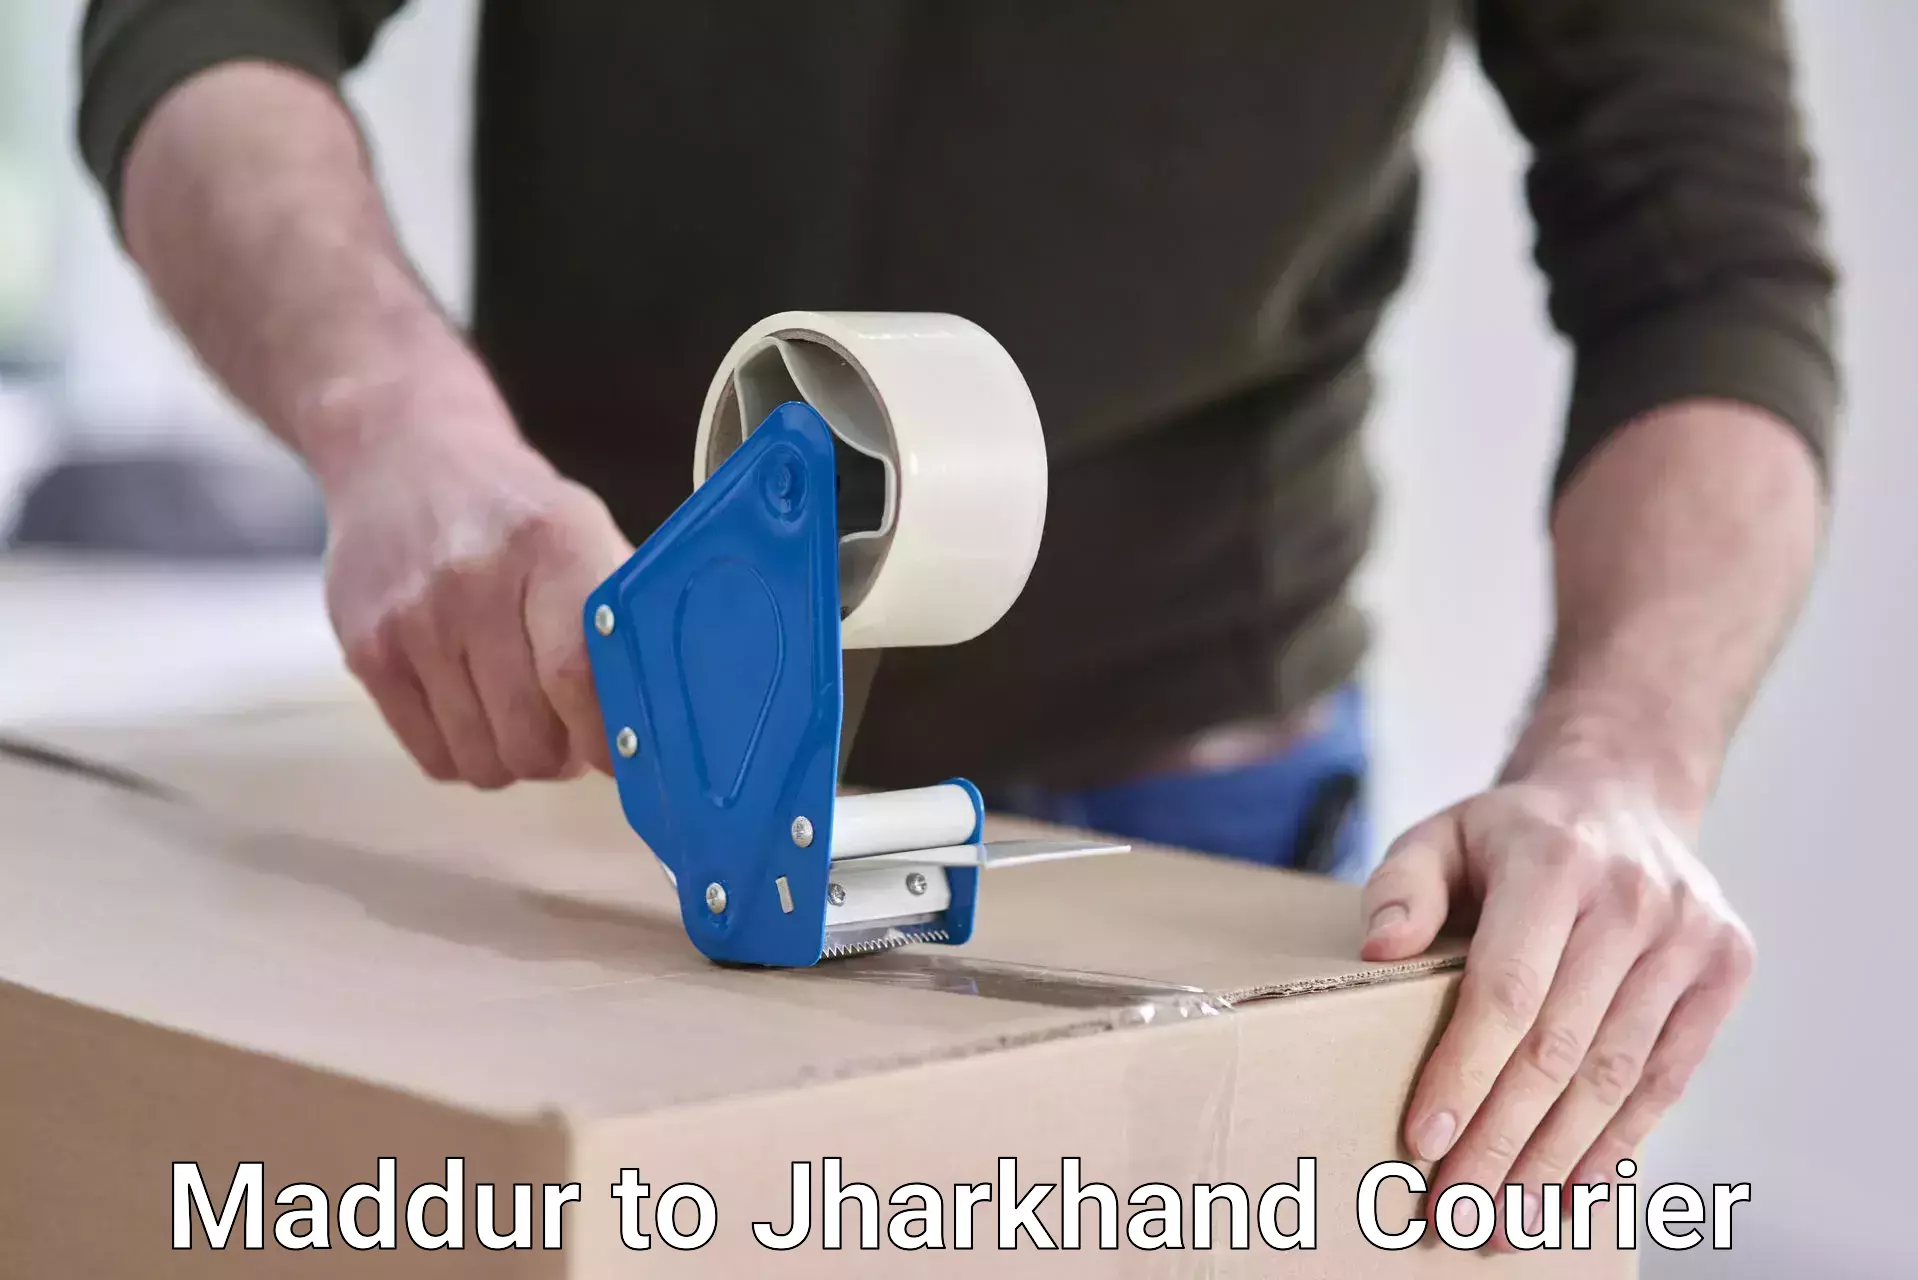 Multi-package shipping Maddur to Jamshedpur